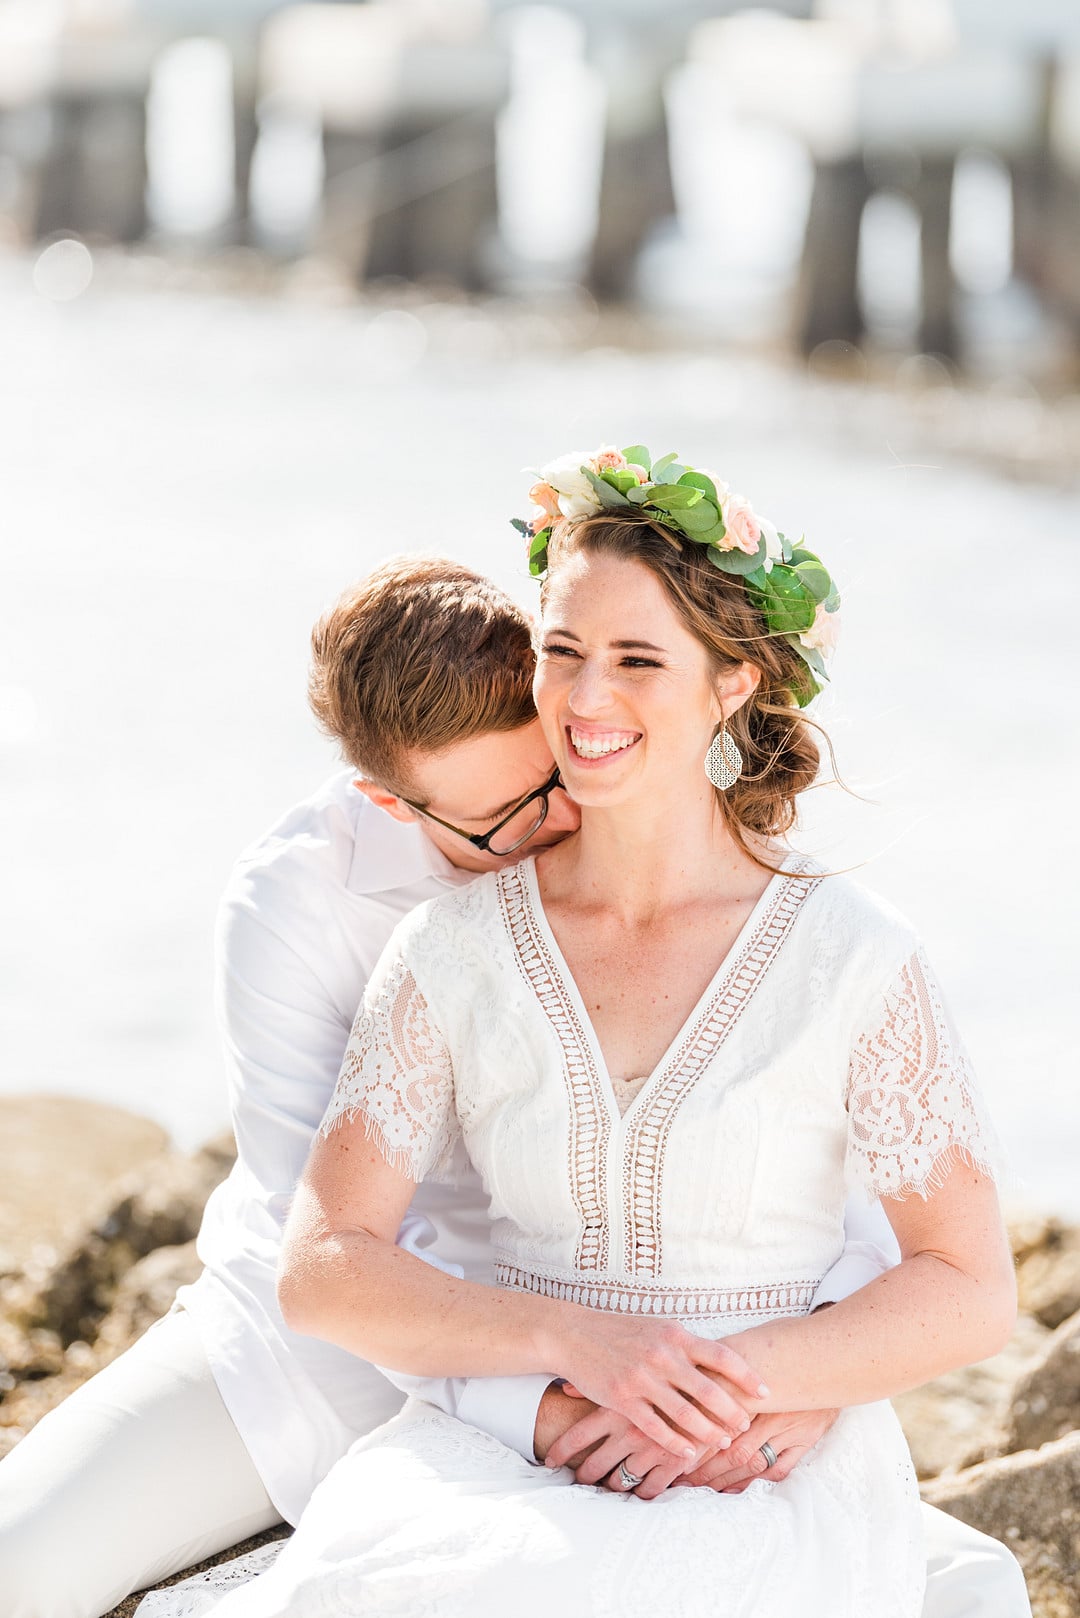 Romantic, Spring Styled Wedding with Horses on the Beach_Christine Austin Photography_©christineaustinphotography_2021_RomanticBeachStyledShoot_Austin+Naomi_28_low